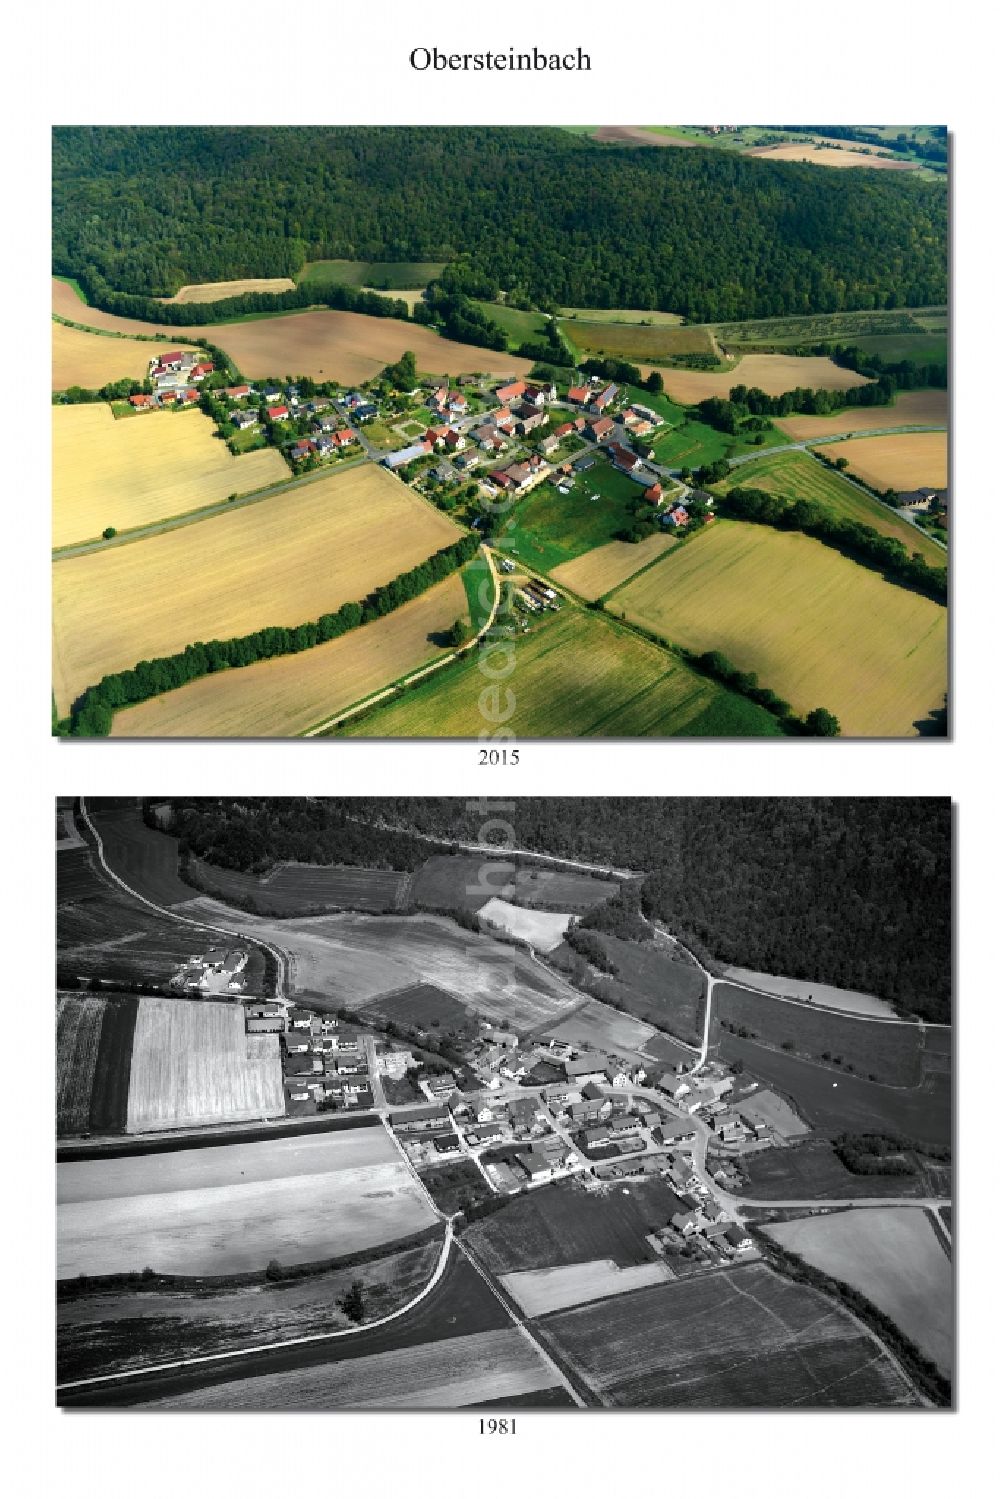 Aerial photograph Obersteinbach - 1981 and 2015 village - view change of Obersteinbach in the state Bavaria